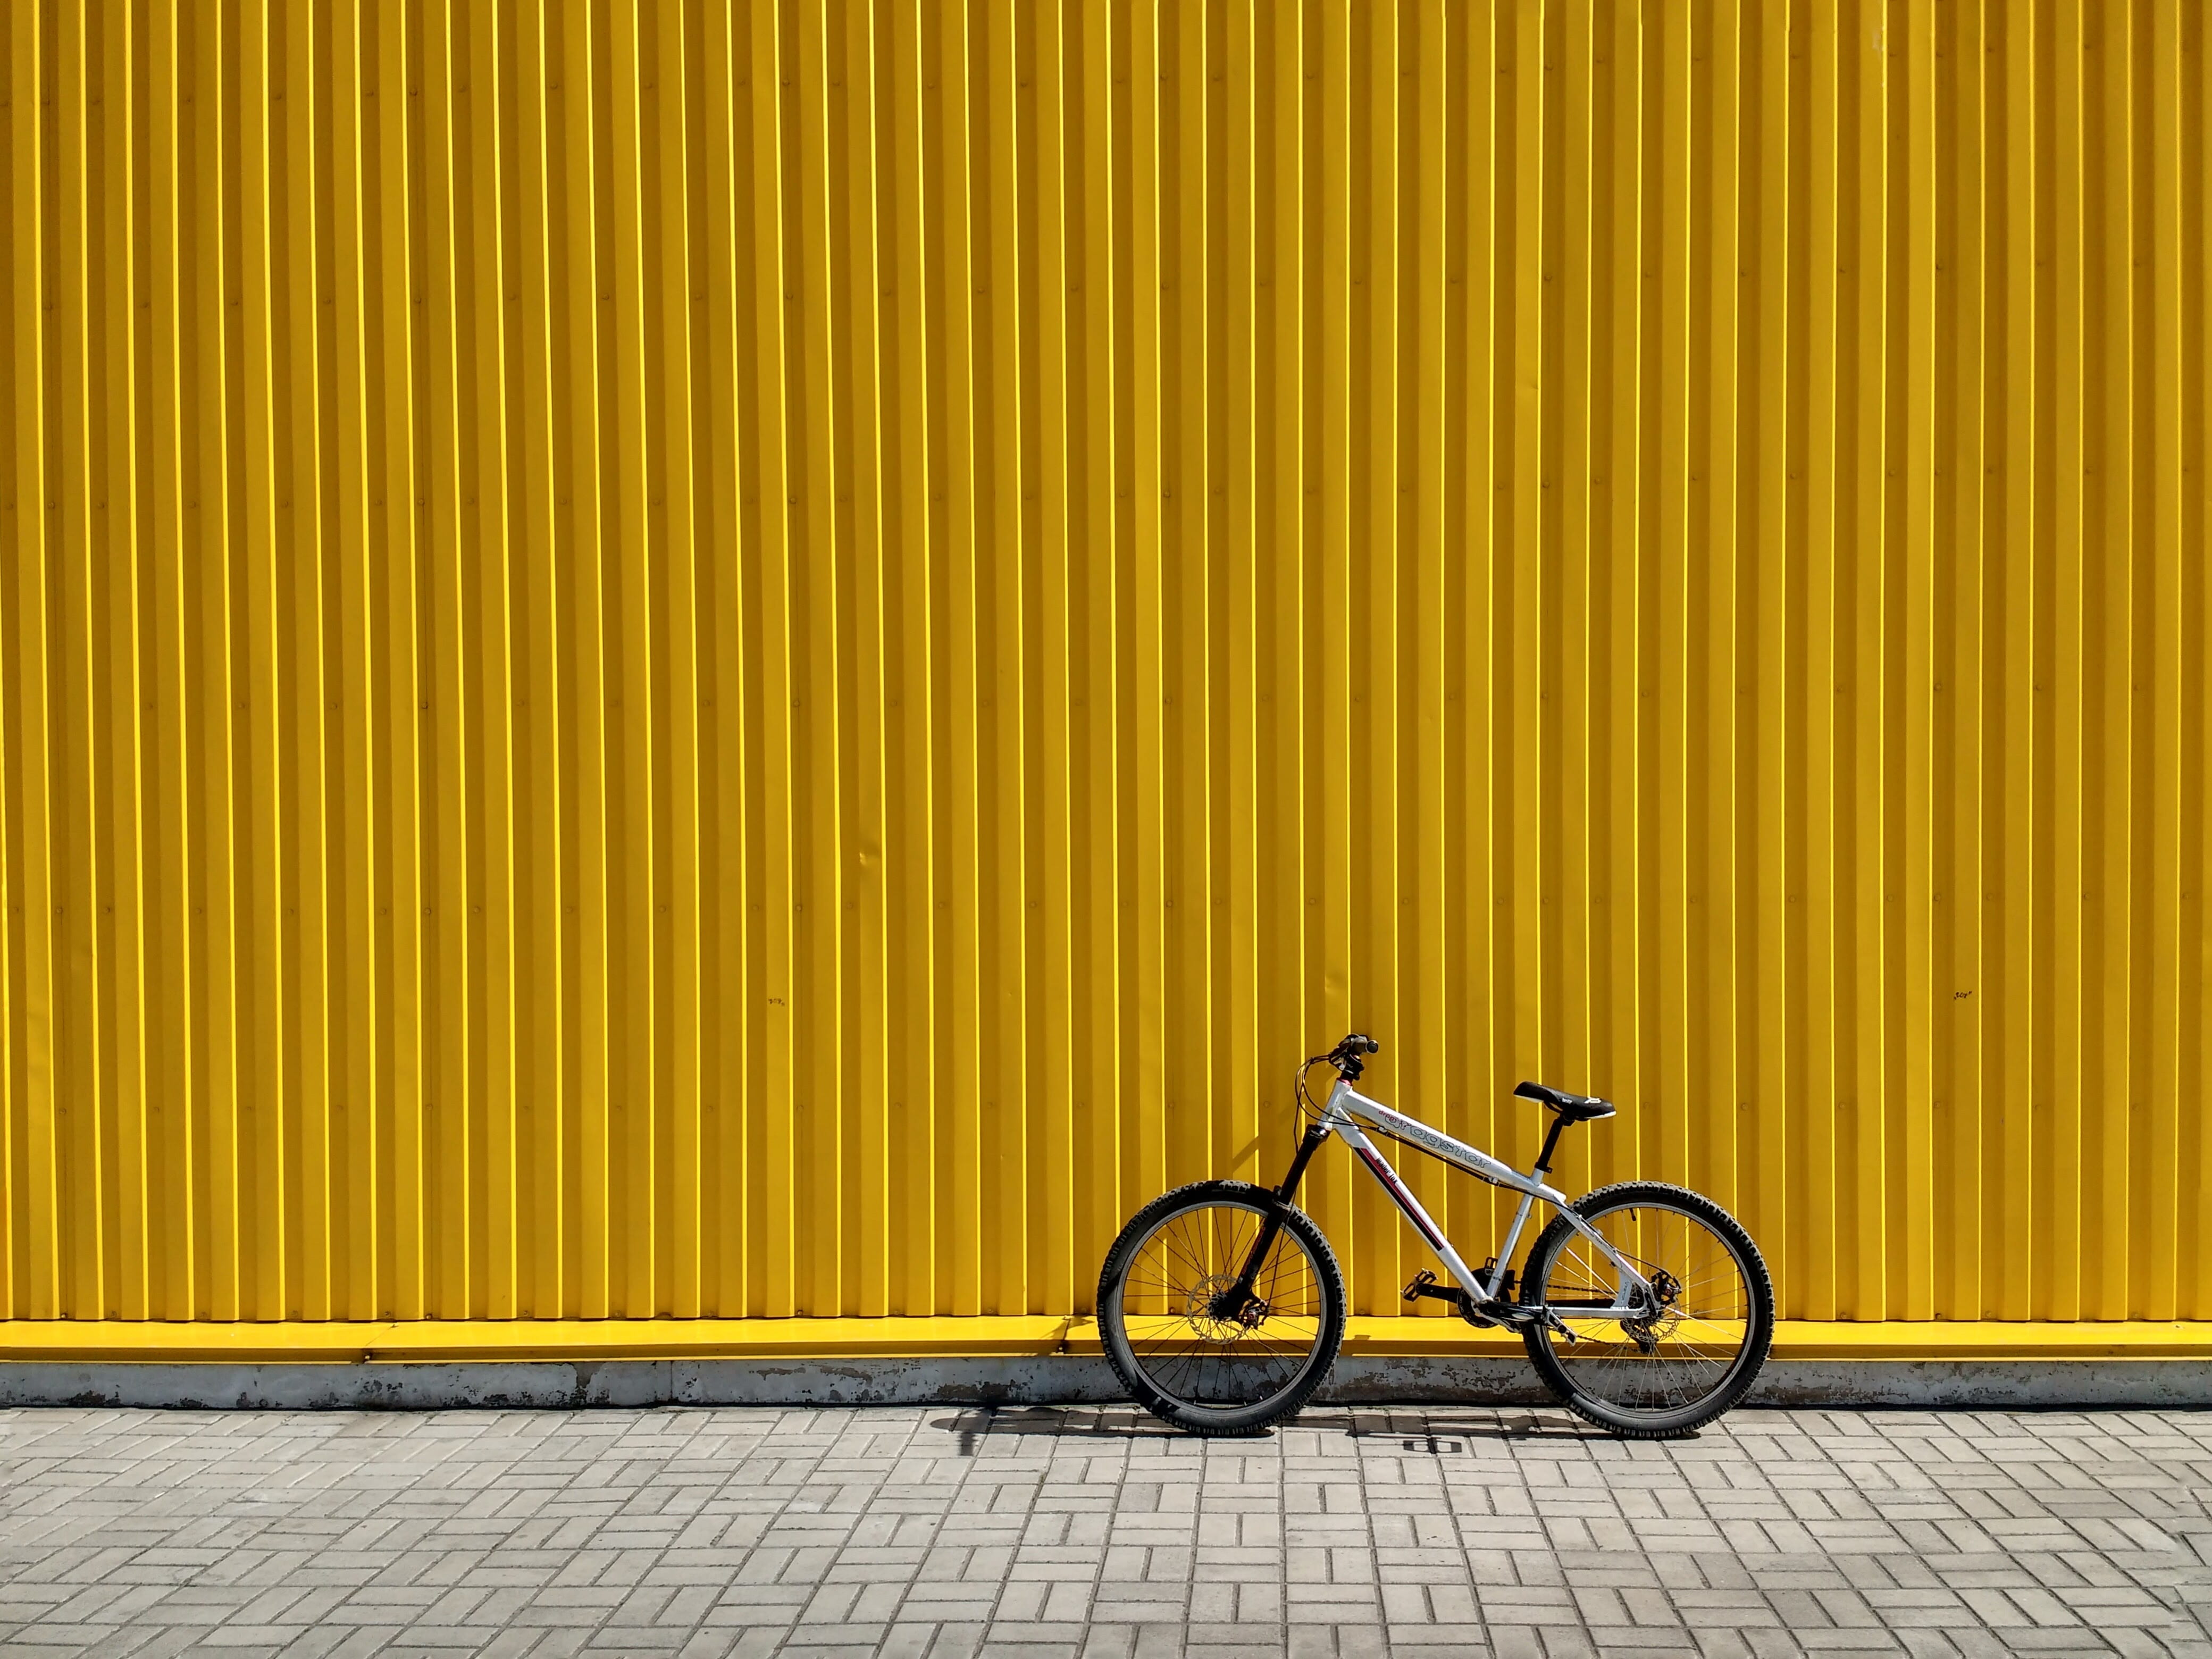 gray and black bike leaning on wall, bicycle leaning on yellow intermodal container